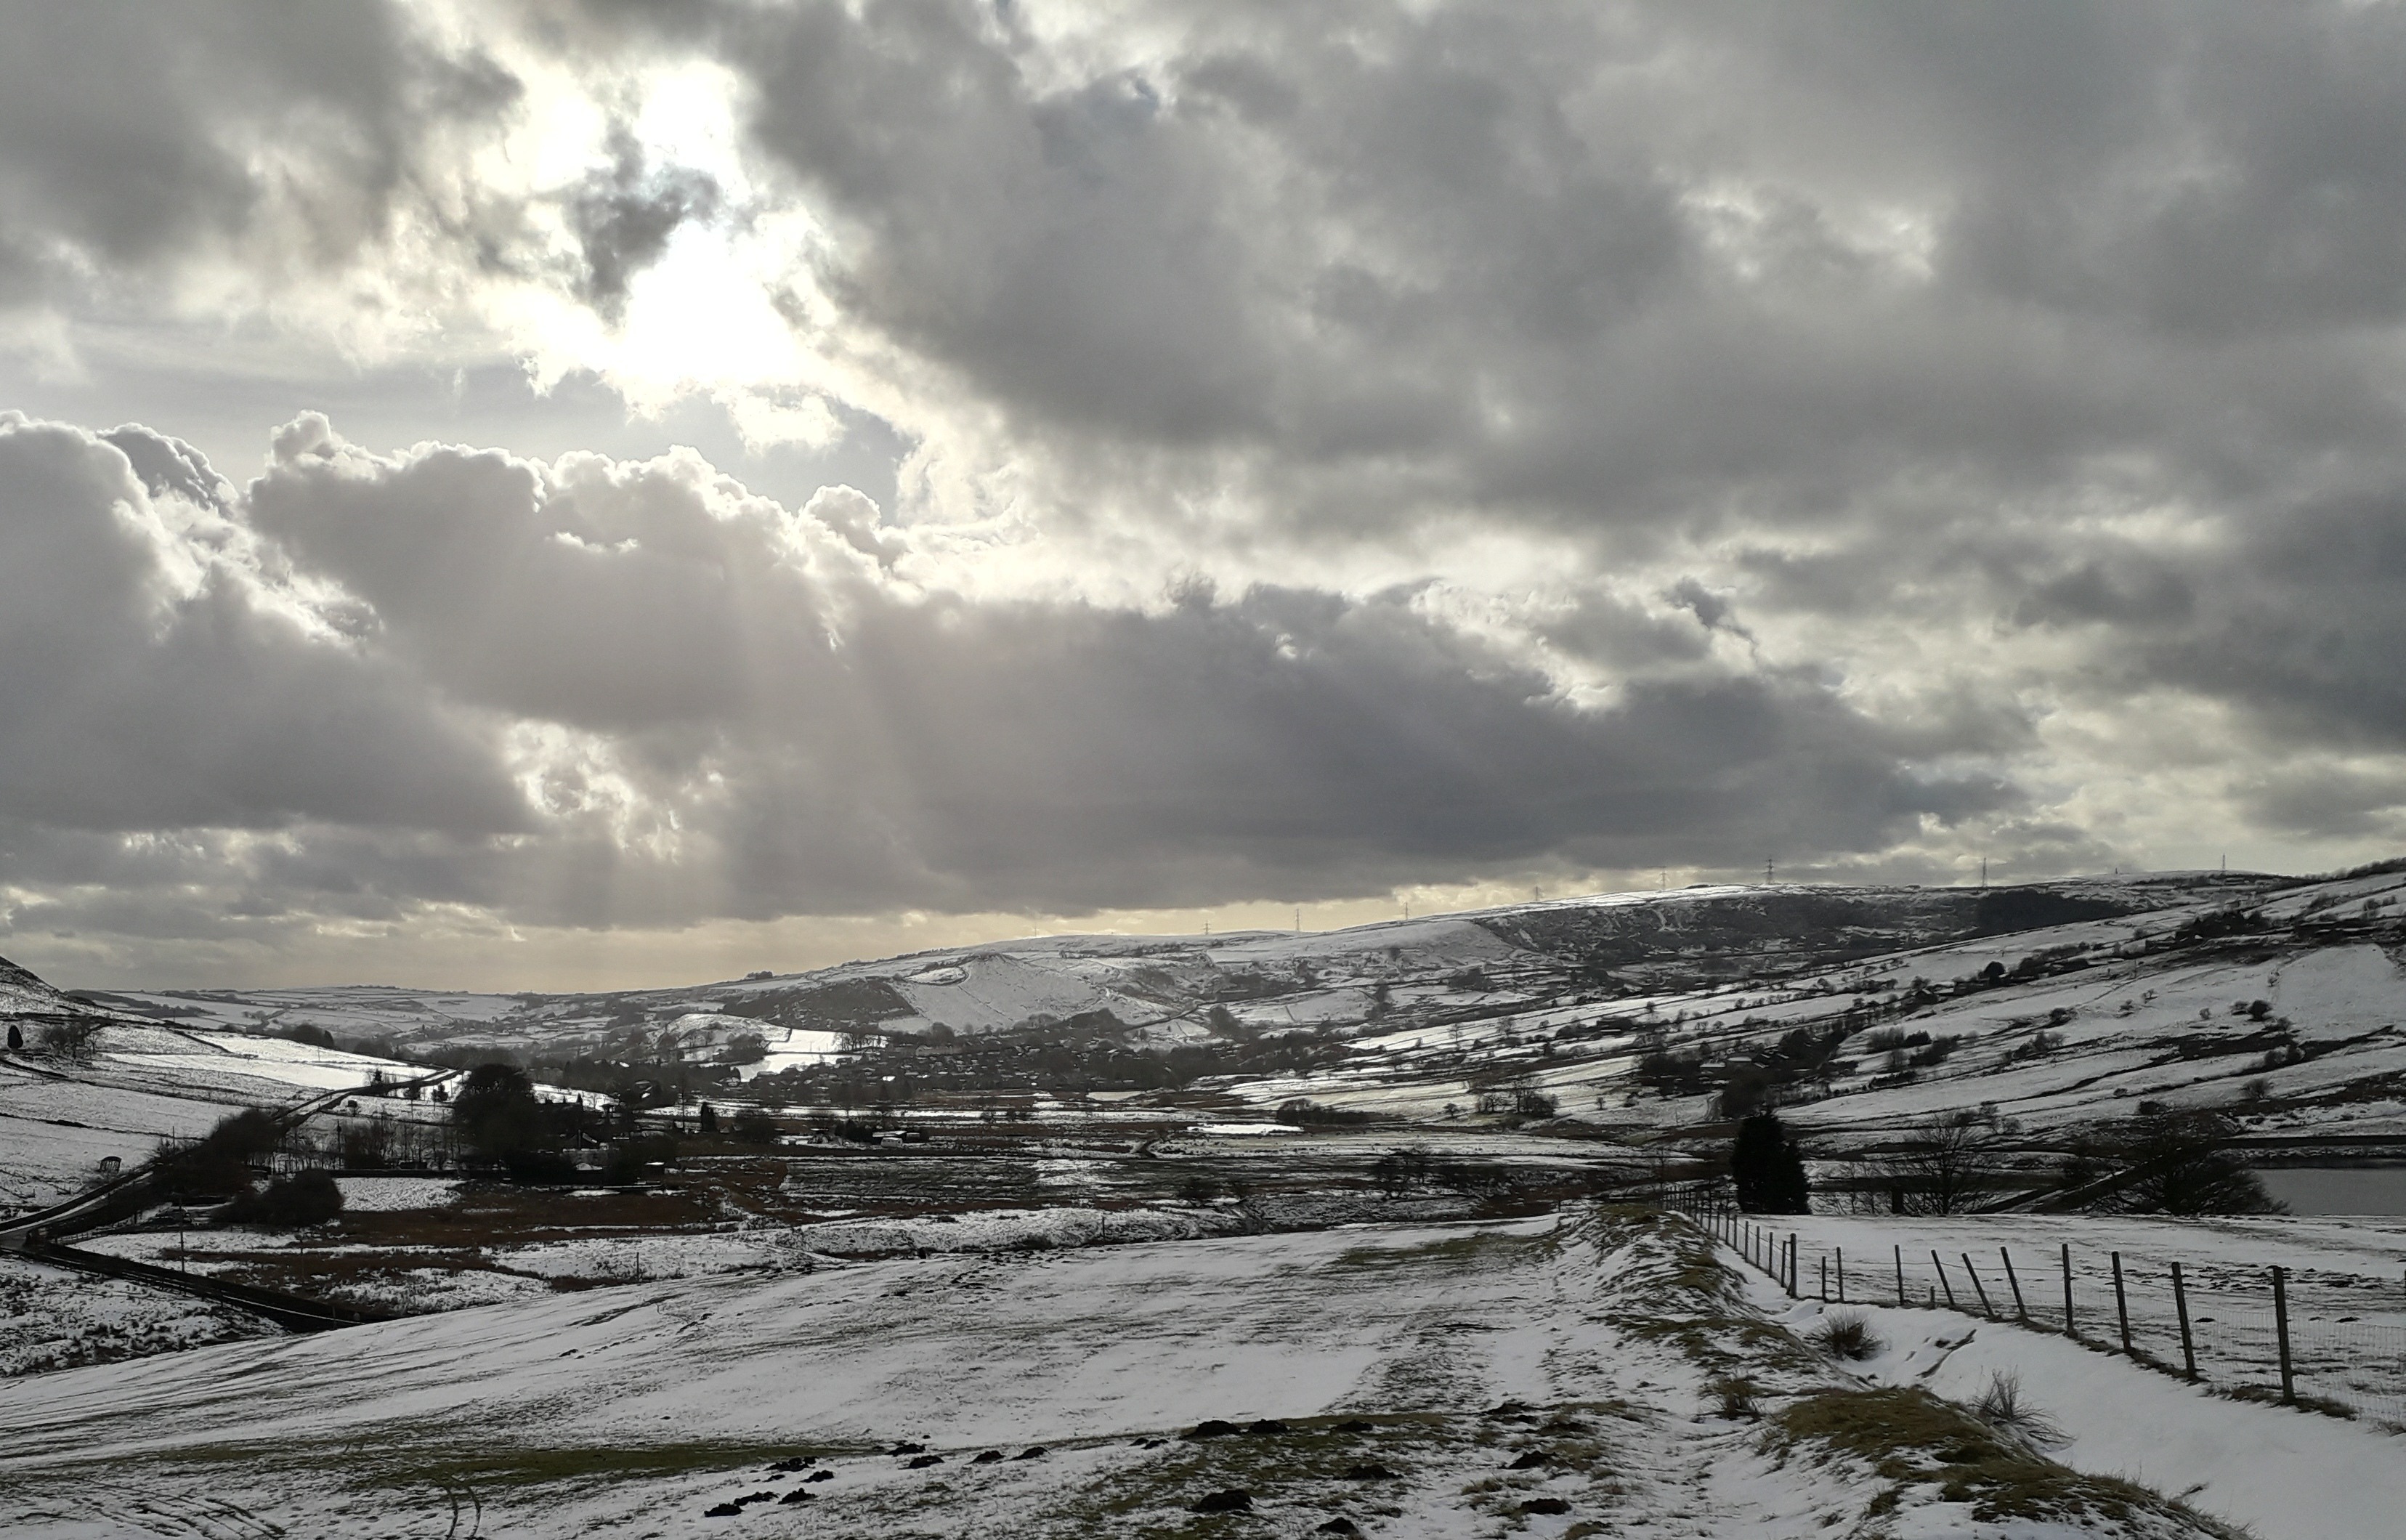 12/02/18, Snowy view along the valley towards Delph